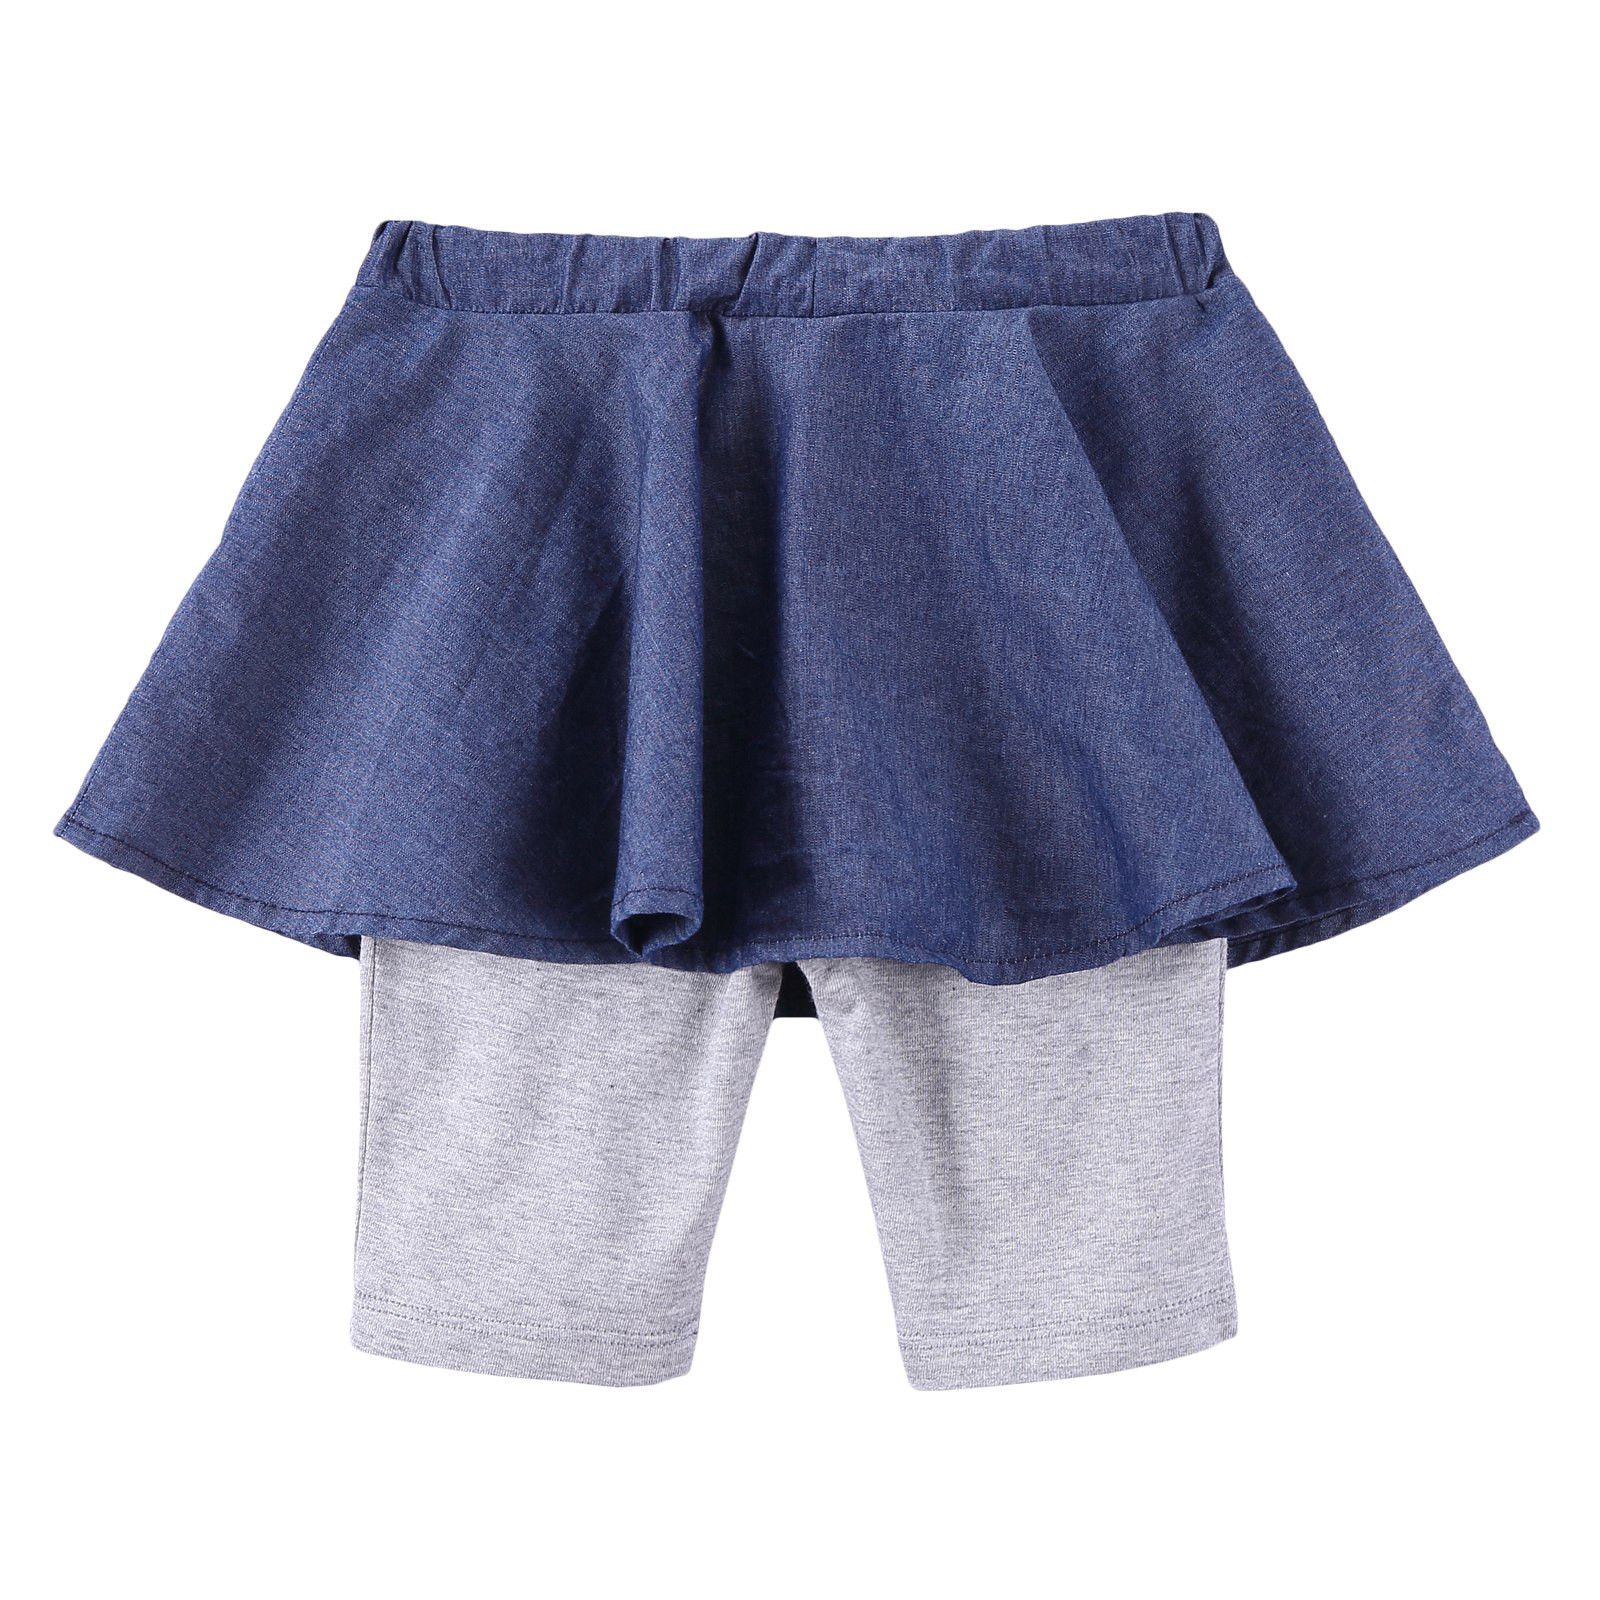 Baby Girls Blue Embroidered Trims Skirt With Grey Leggings - CÉMAROSE | Children's Fashion Store - 2